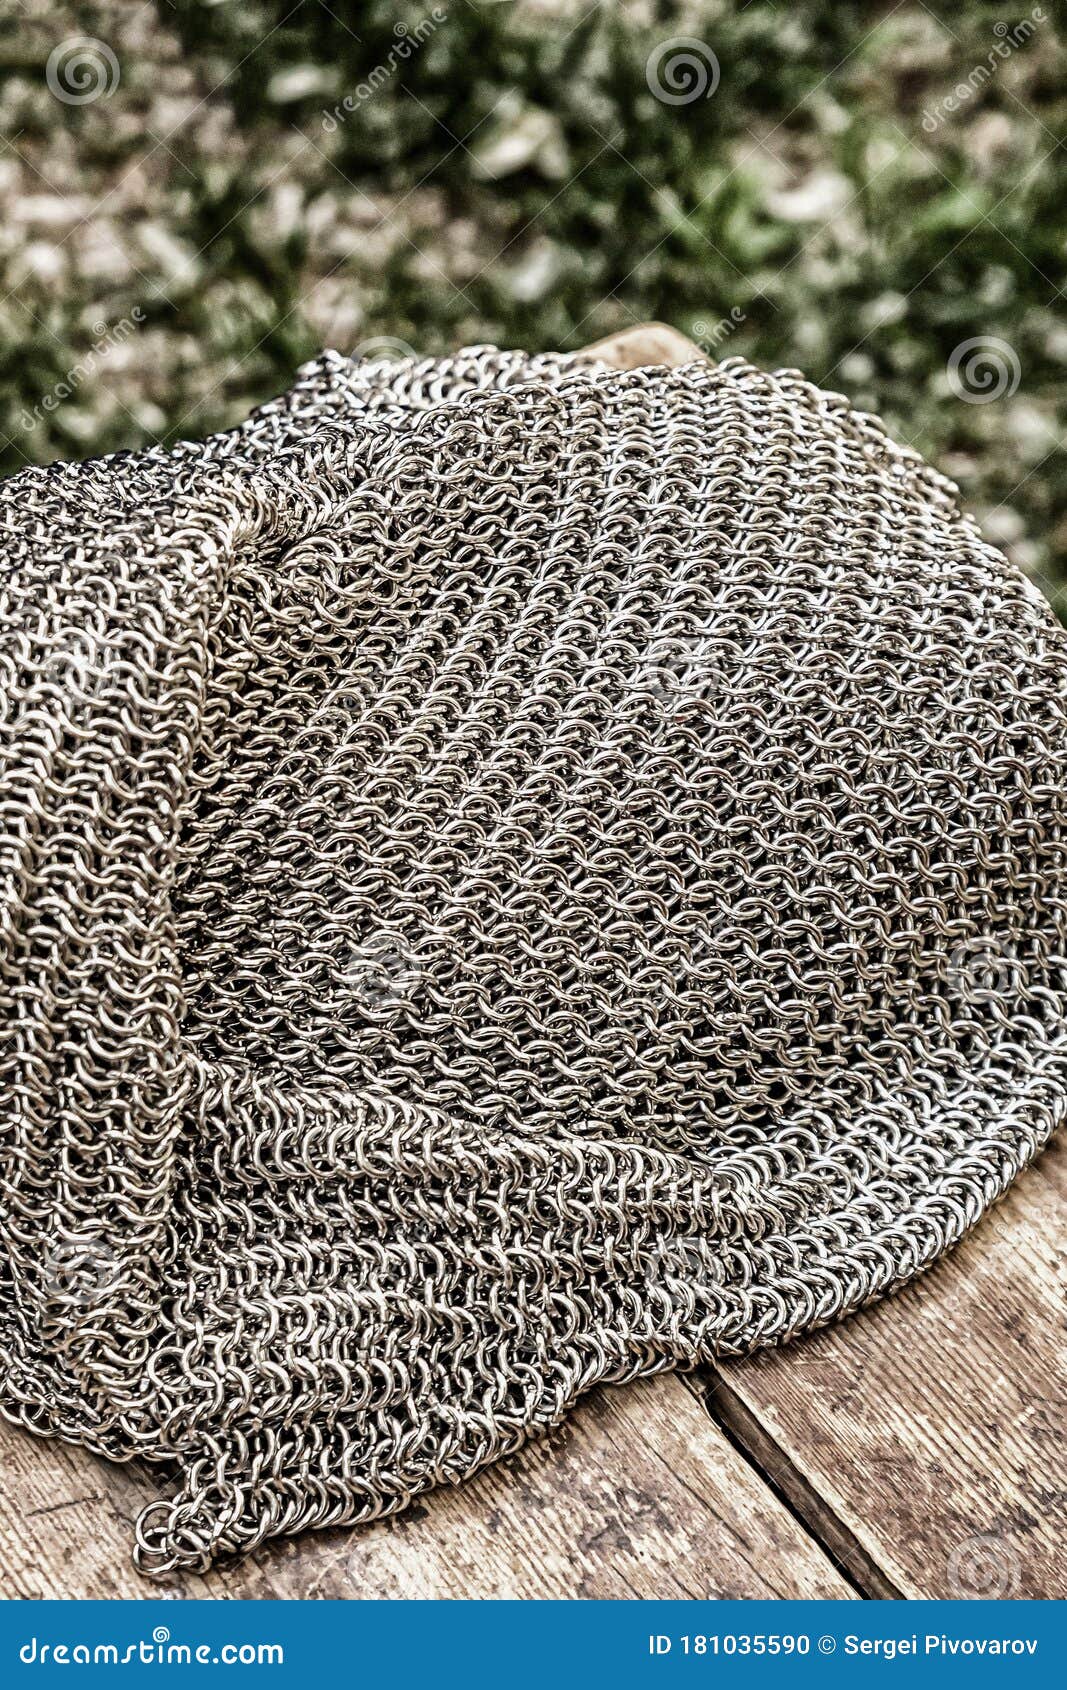 https://thumbs.dreamstime.com/z/iron-chainmail-pattern-heaped-protective-clothing-medieval-warrior-iron-chainmail-pattern-heaped-protective-clothing-181035590.jpg